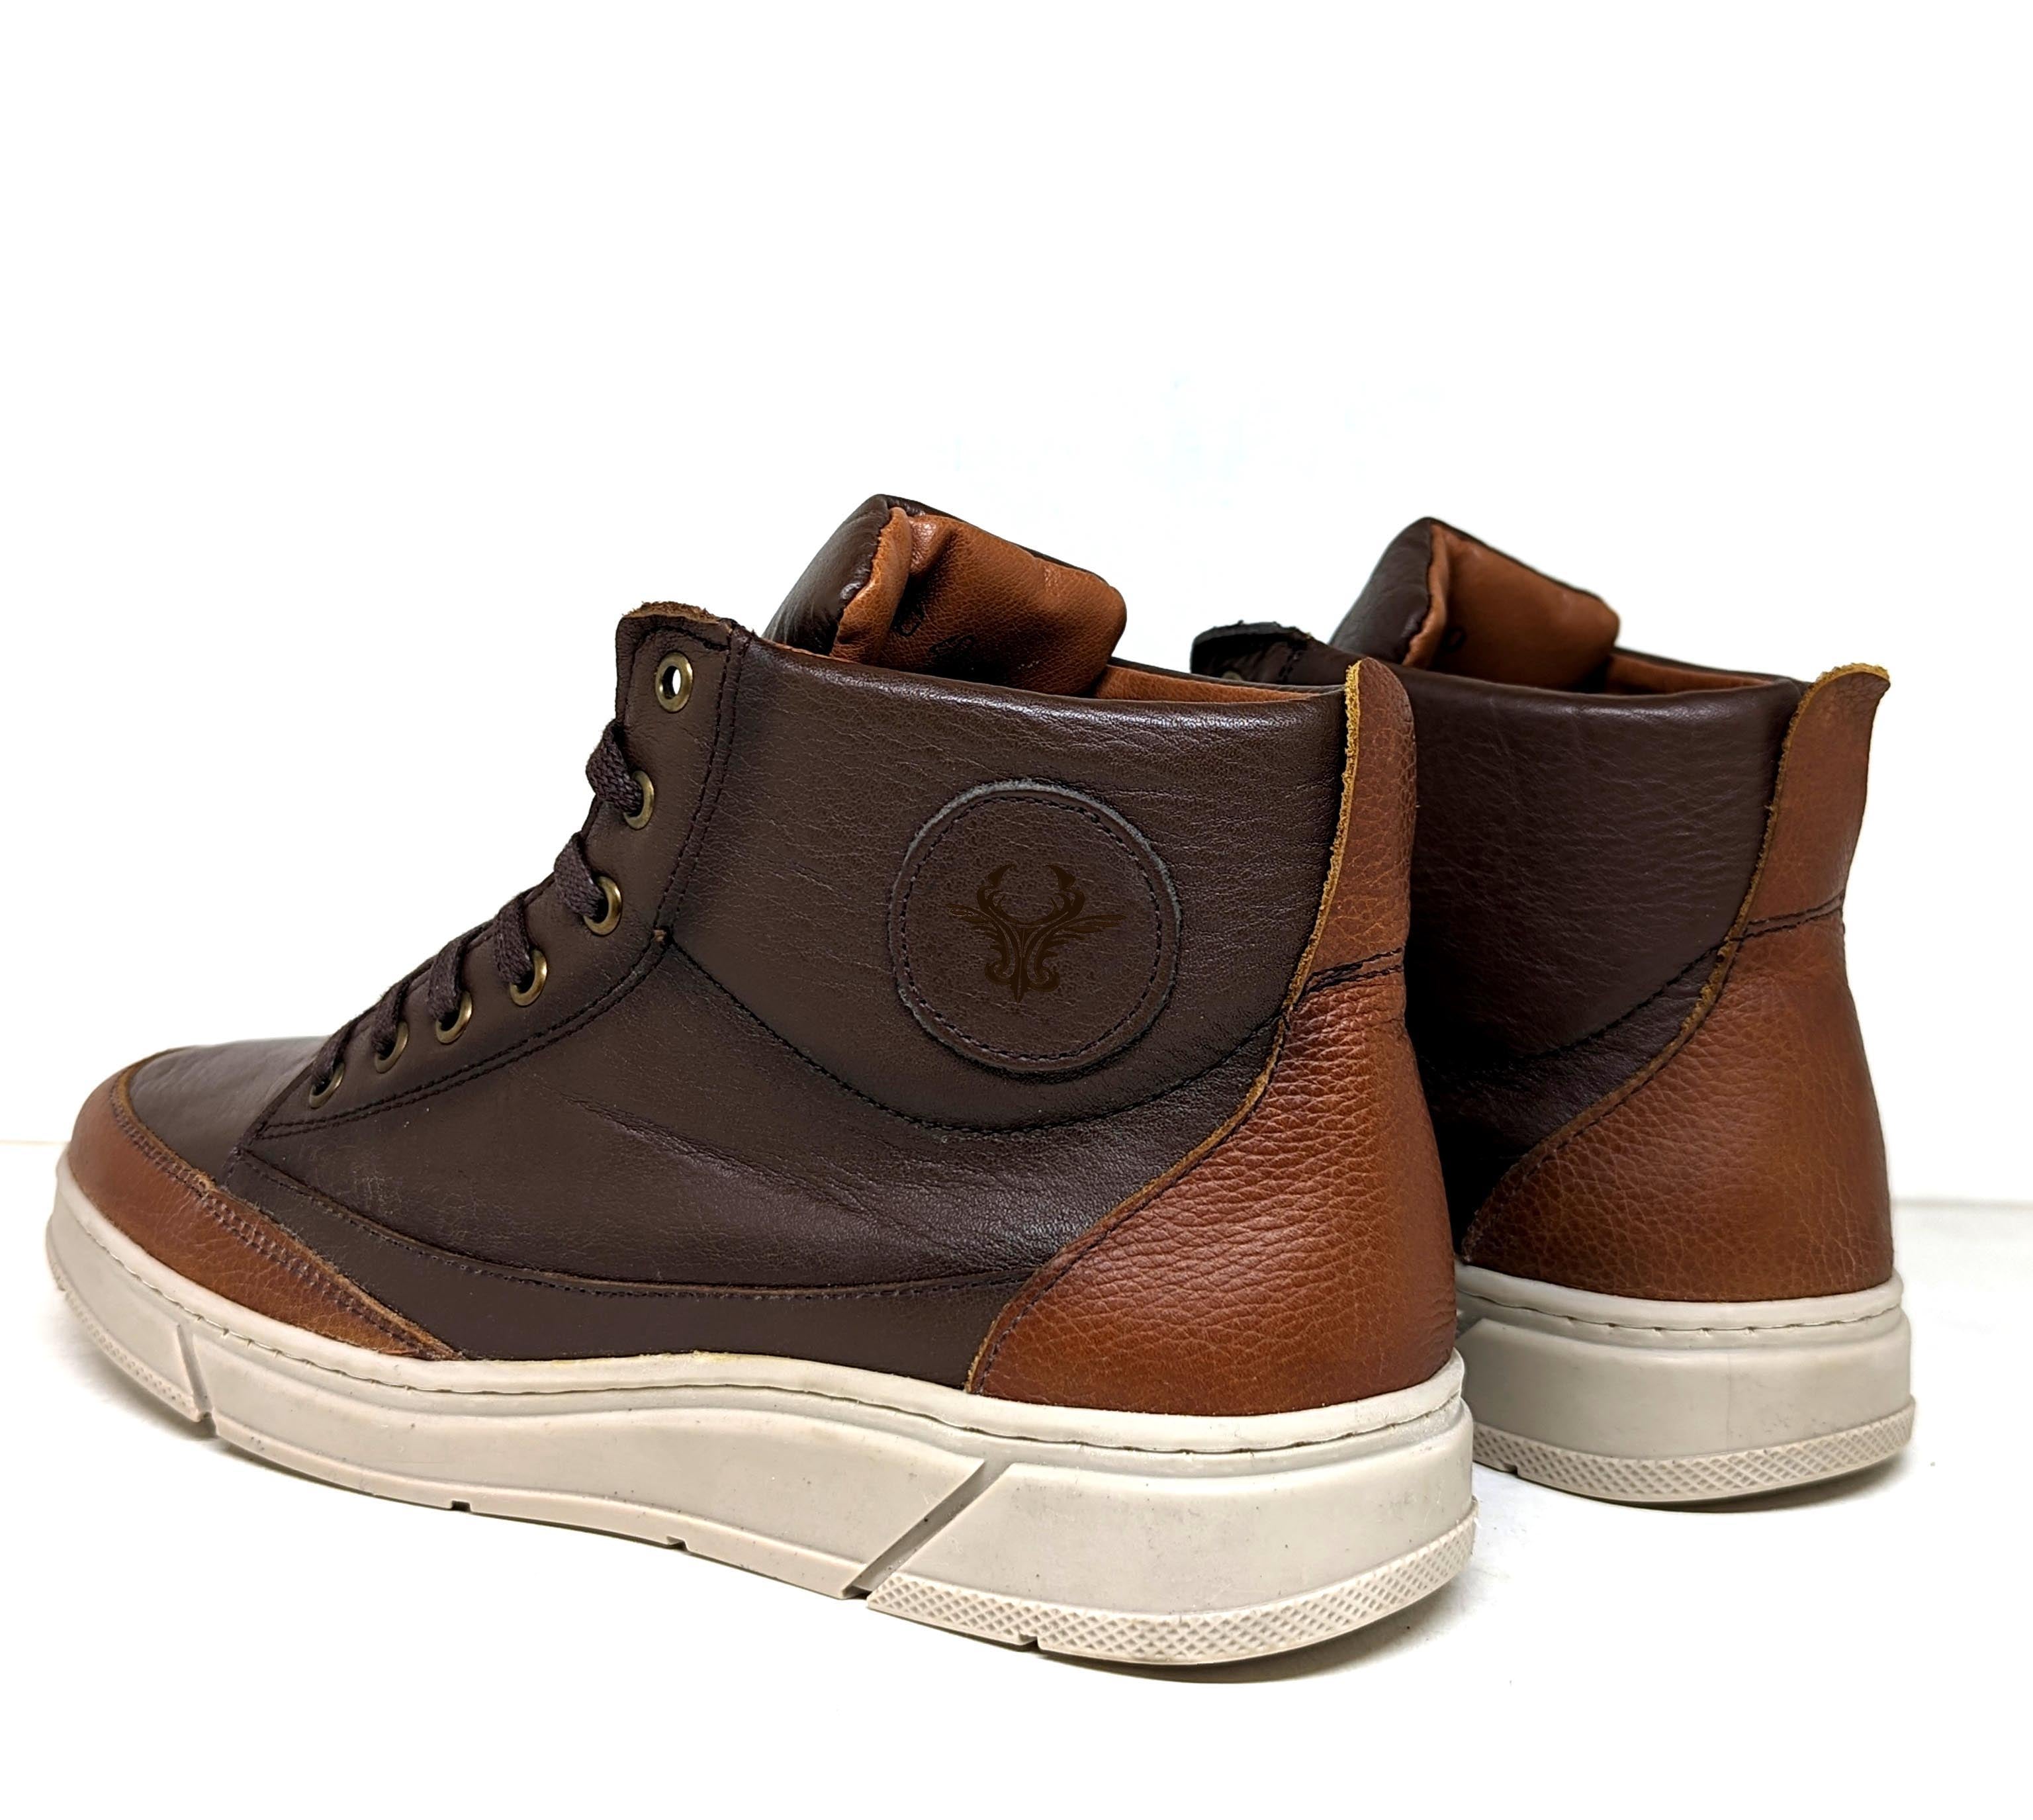 Rider Luxe Boots